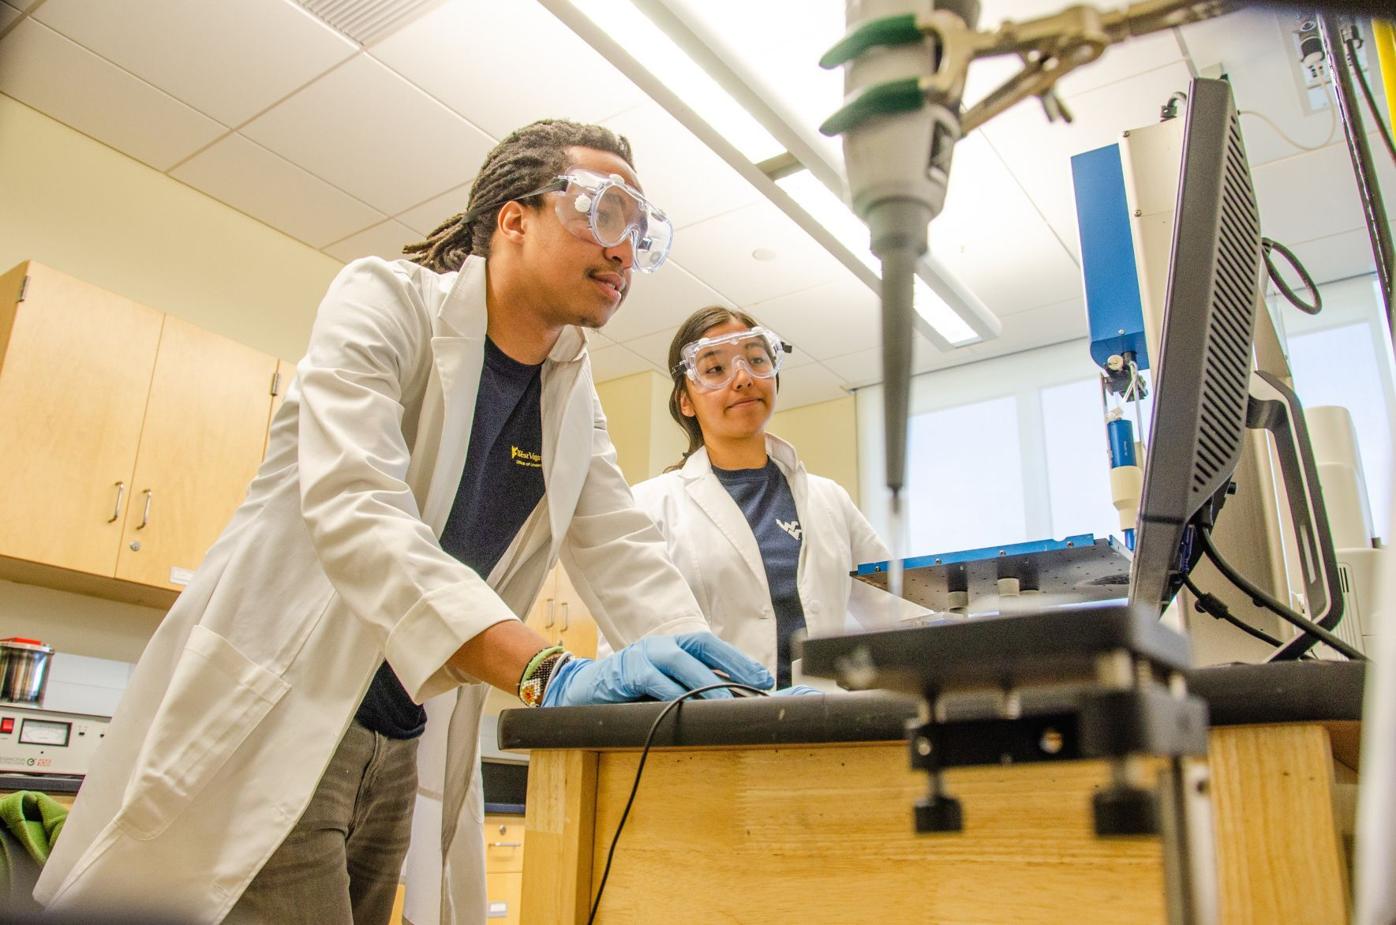 WVU engineers, designers partner to test materials for surgical masks, WVU  Today